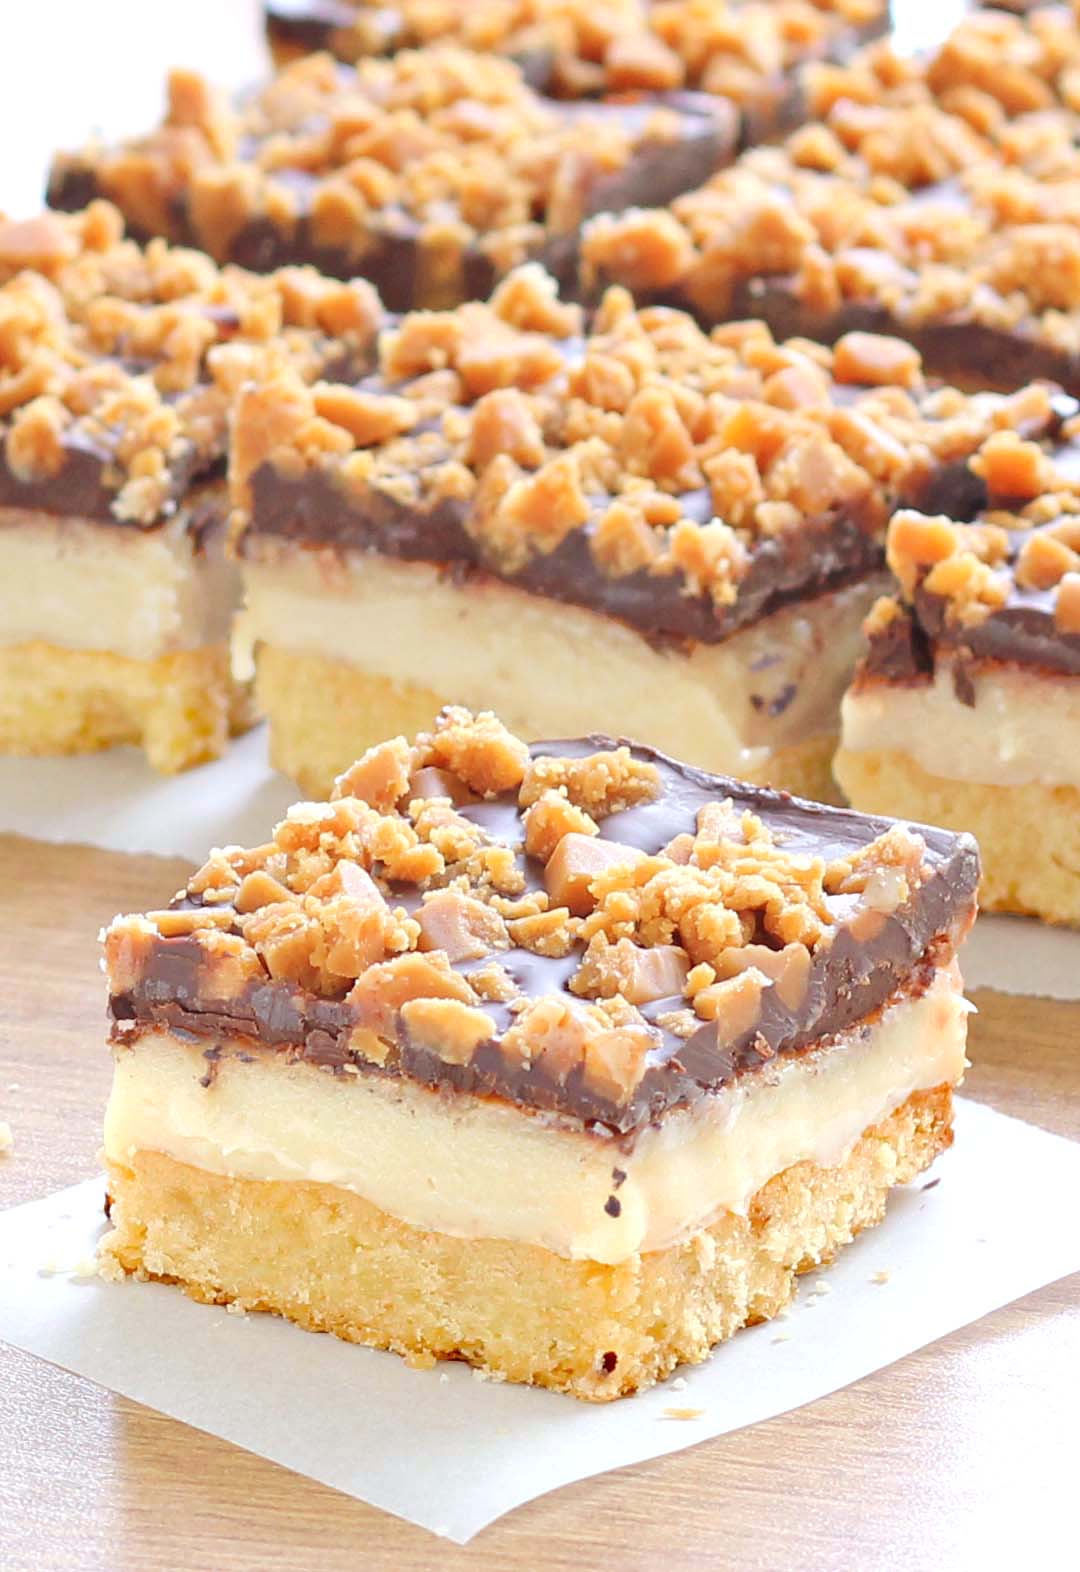 Make these chocolate toffee bars for your next party and you’ll be invited back! The sweetened condensed milk and chocolate toffee bits flavor combination makes this the perfect sweet treat.